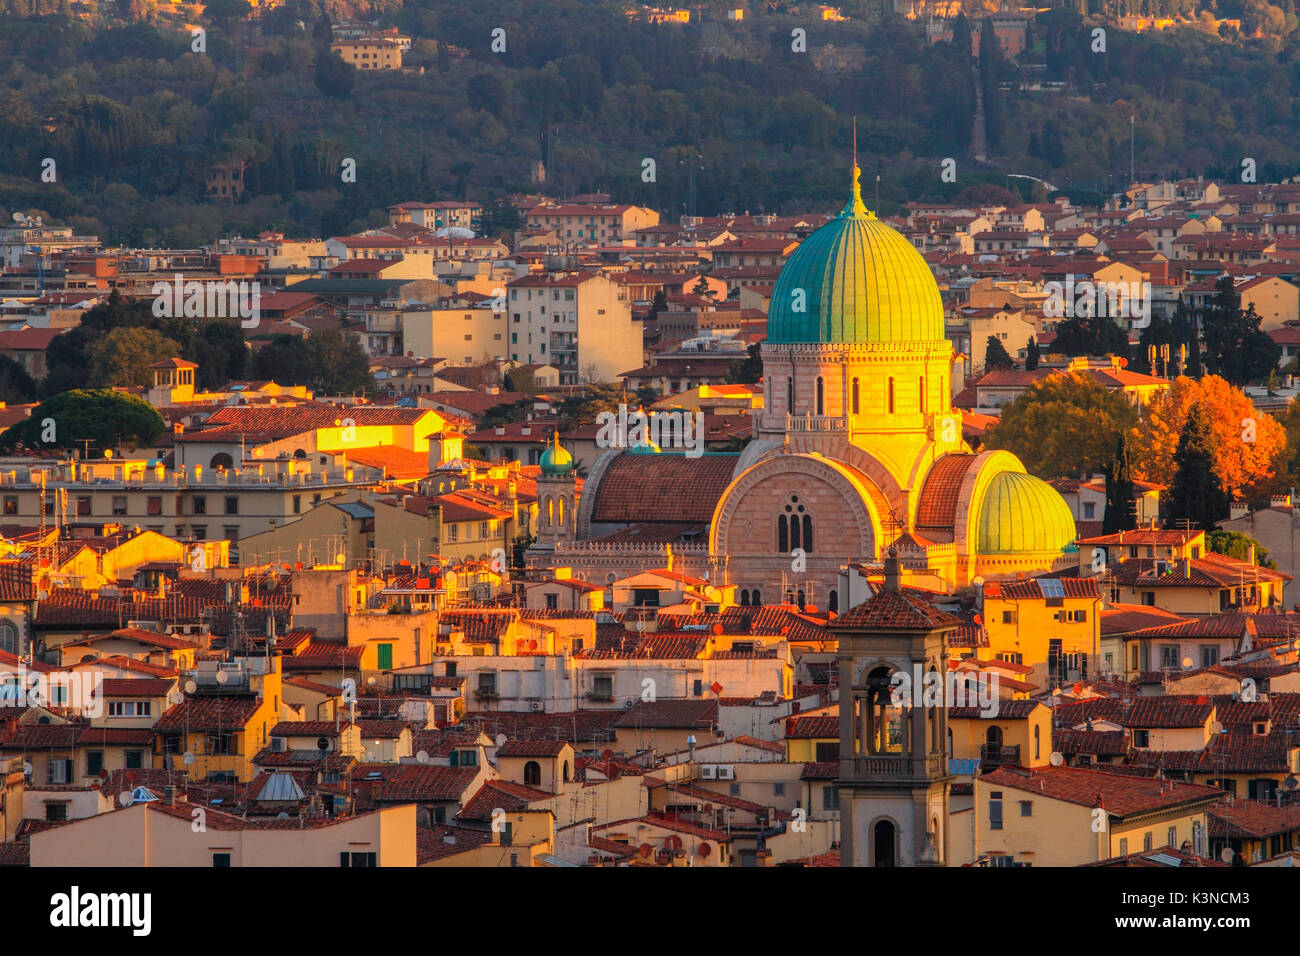 Europe, Italy, Tuscany. The Cappelle Medicee in the Old Town of Florence - city of art of Tuscany at sunset Stock Photo